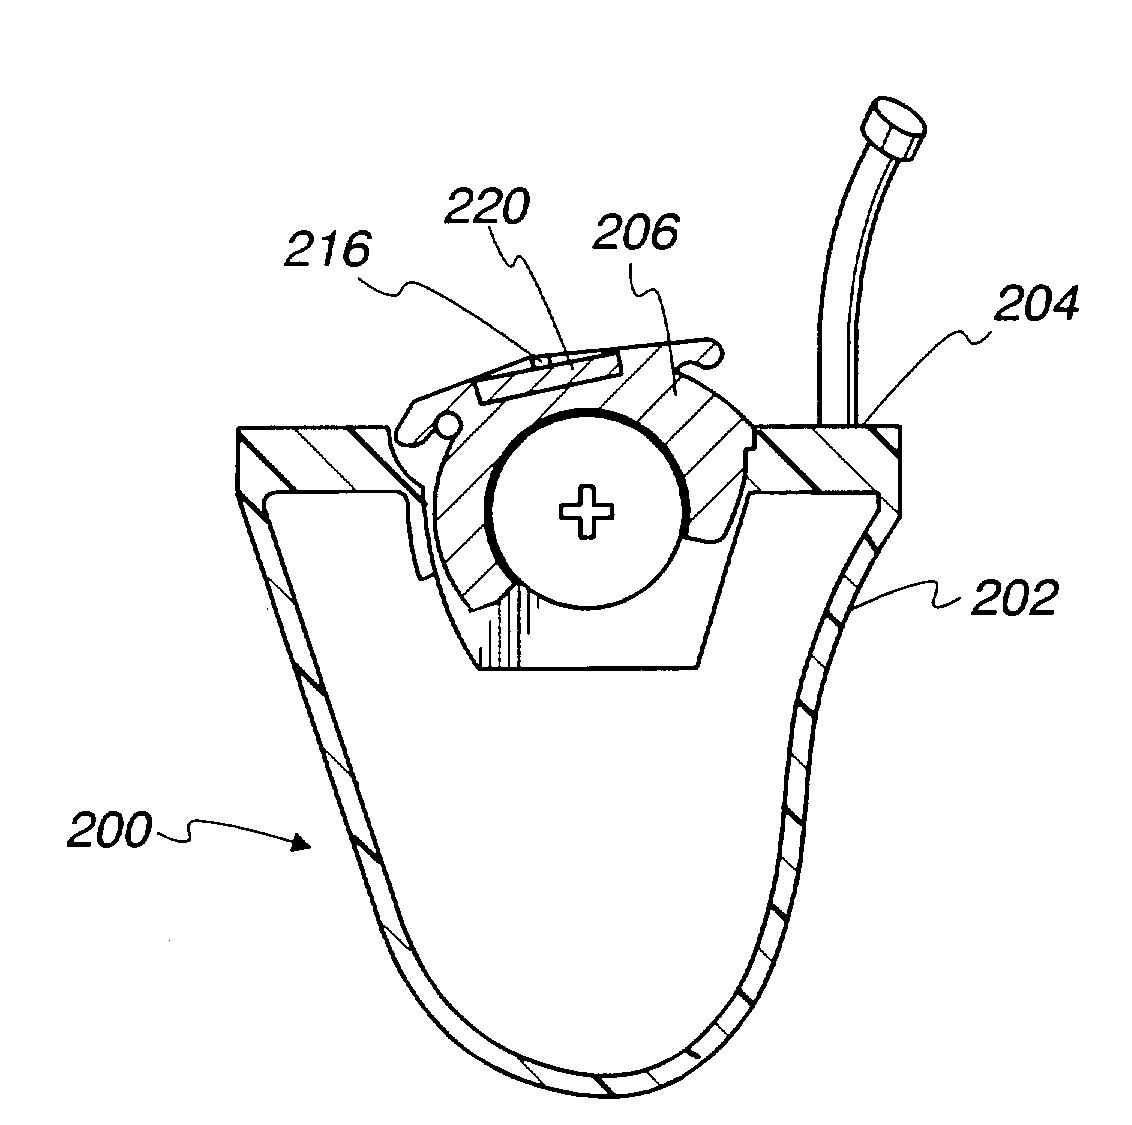 Silicon-based transducer for use in hearing instruments and listening devices